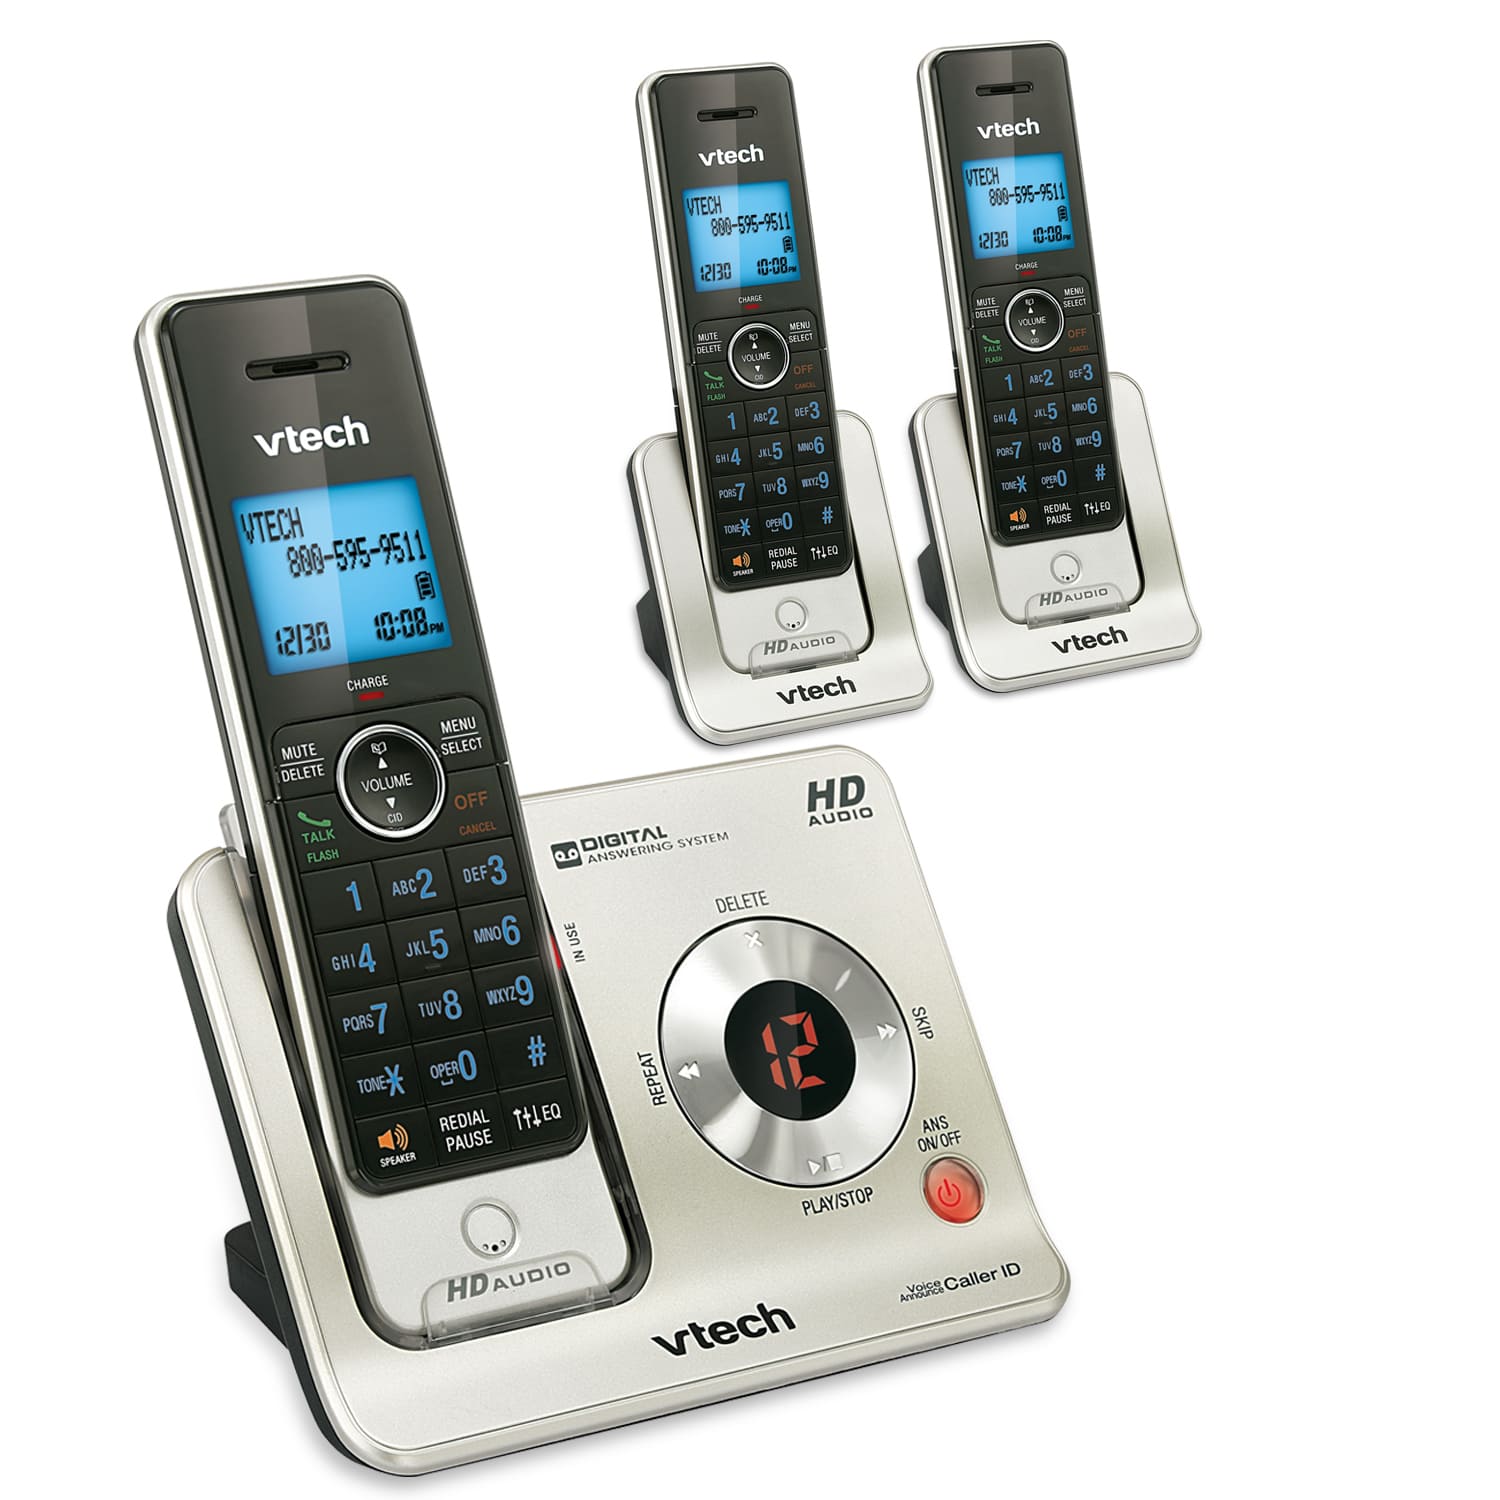 NEW VTech LS6425-3 3-Handset Dect 6.0 Cordless Phone with Answering Machine 